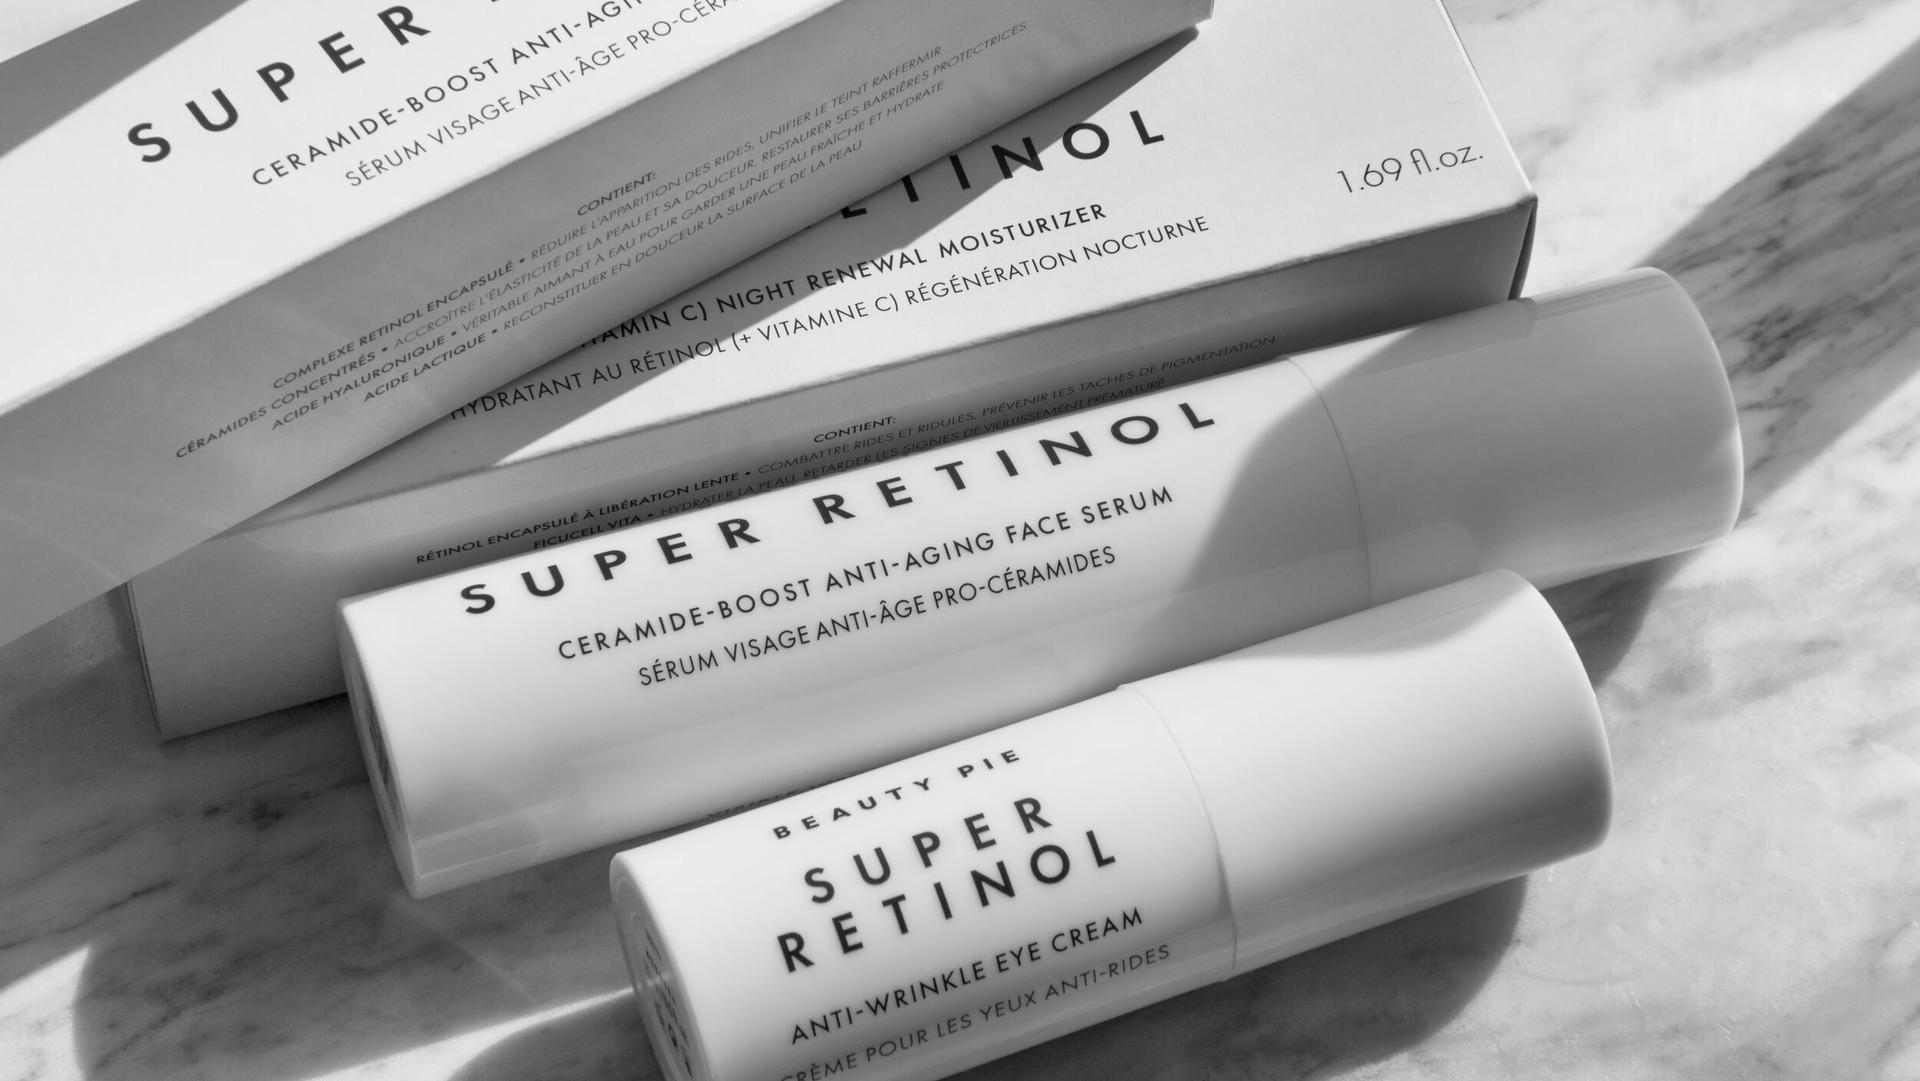 Retinol overnight leaves your skin refreshed